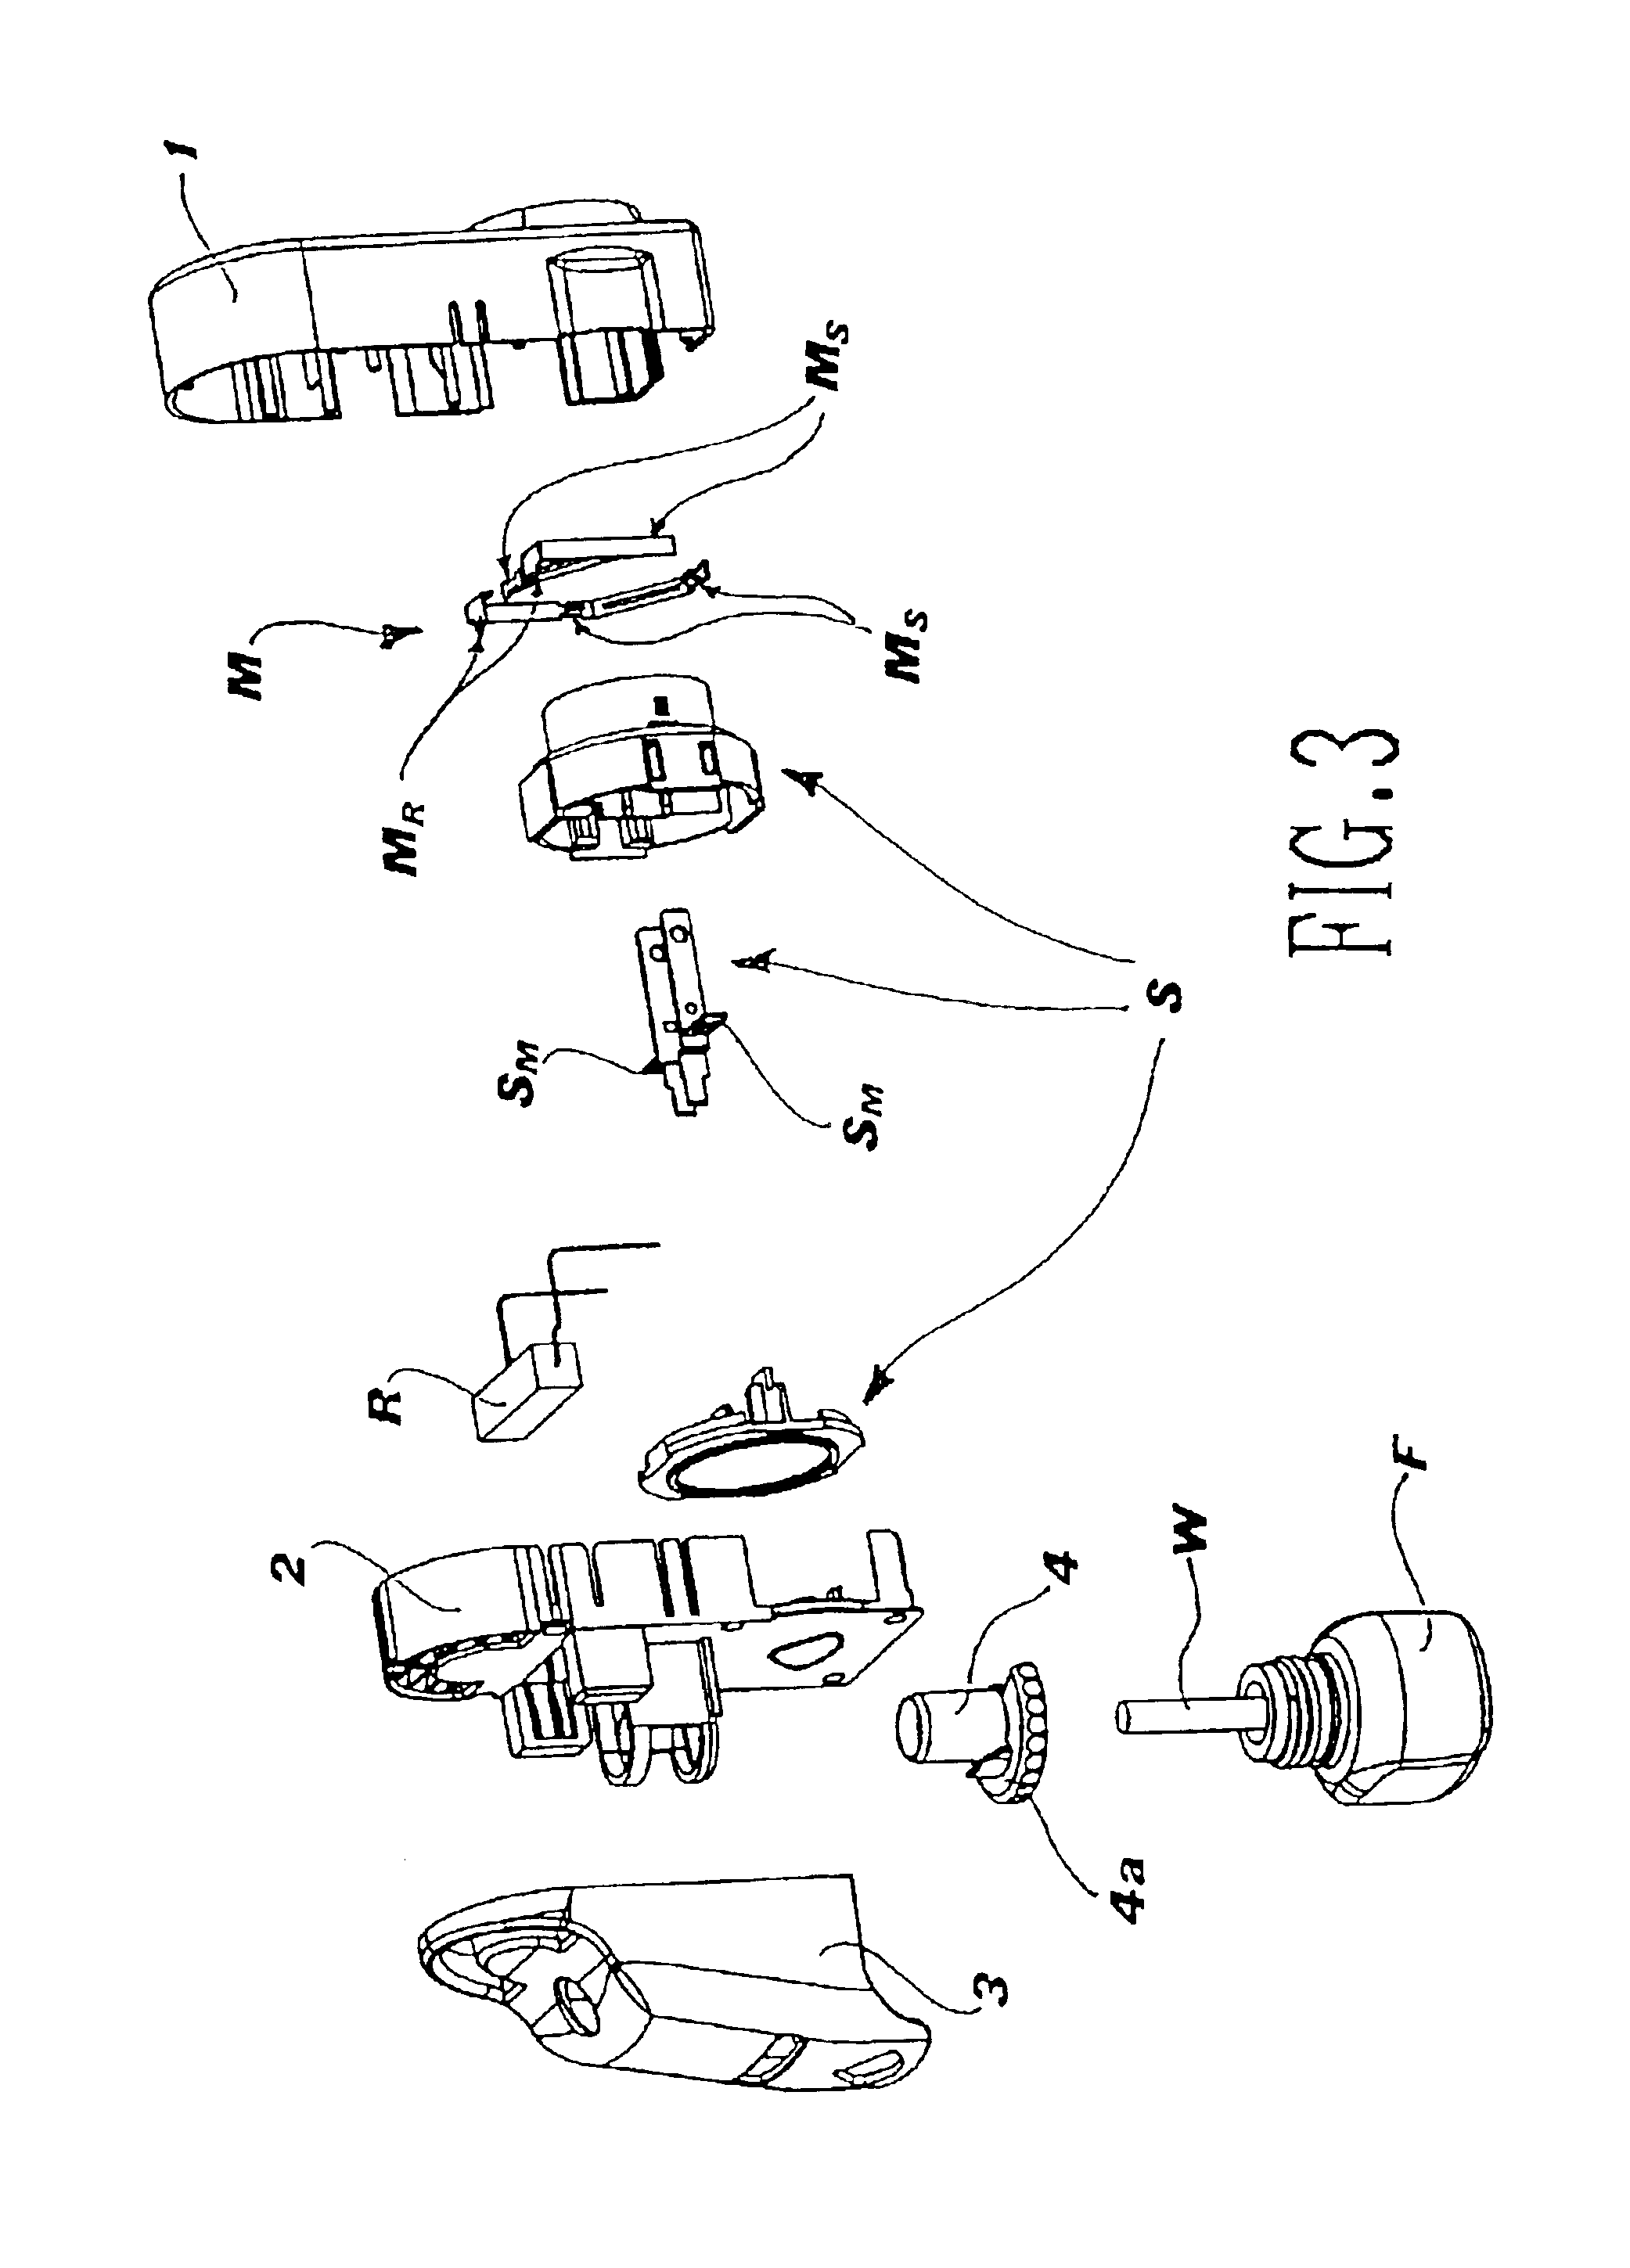 Multi-functional electrical vaporizer for a liquid substance and method of manufacturing such a vaporizer